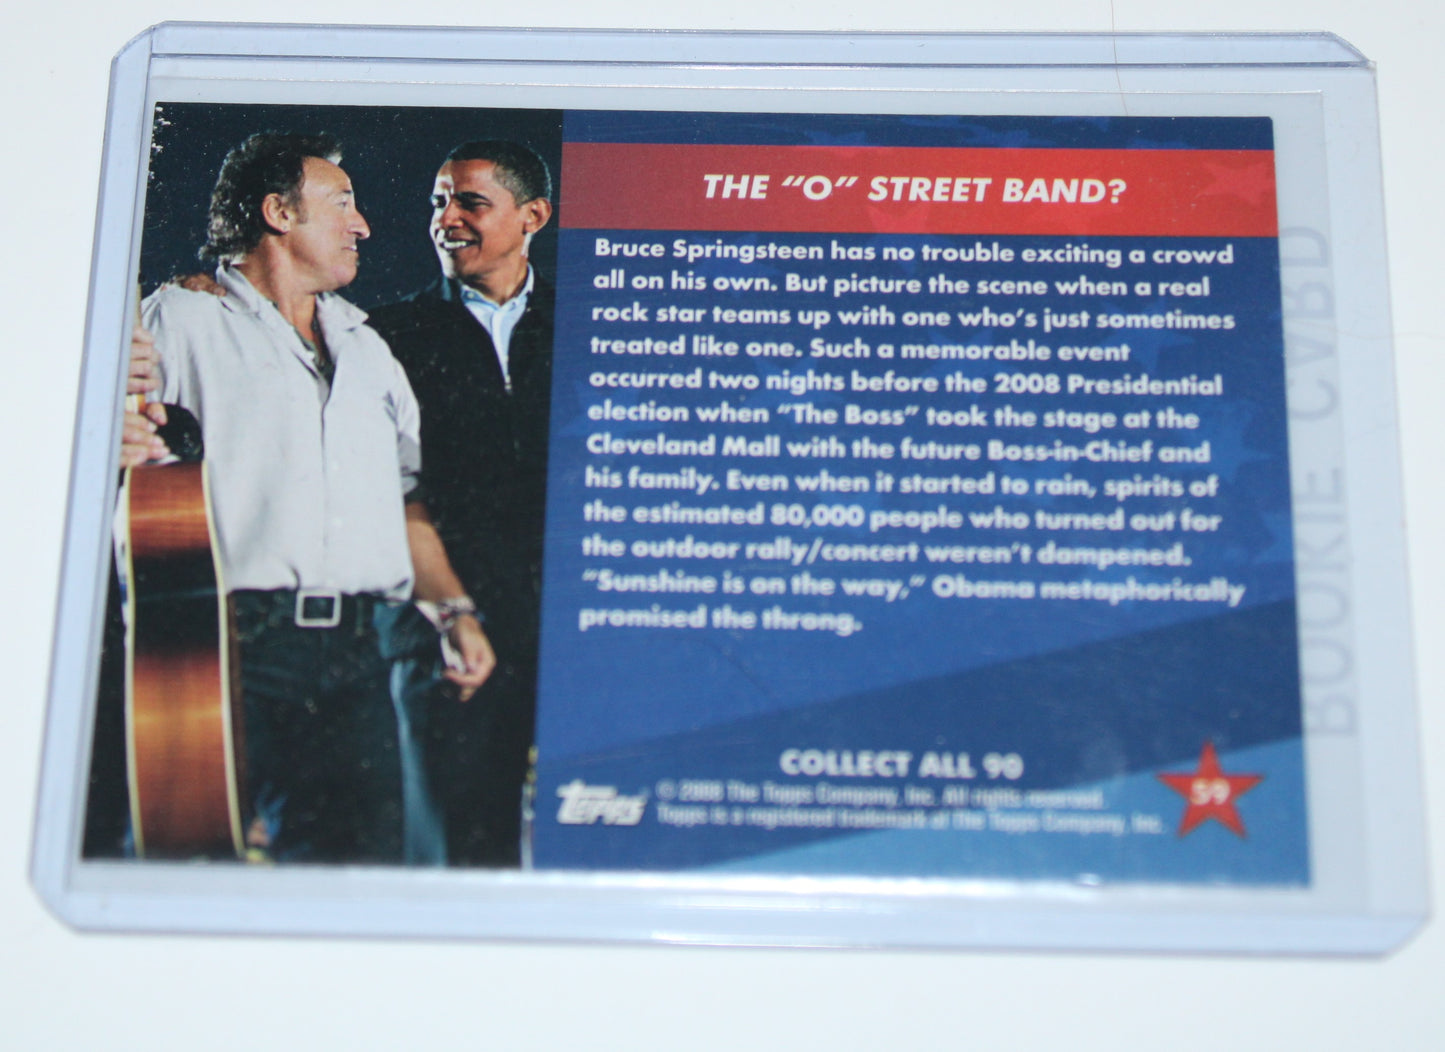 Bruce Springsteen TOPPS Gold Foil Stamp 2009 Inauguration Day - Official Trading Card - rarest of all!